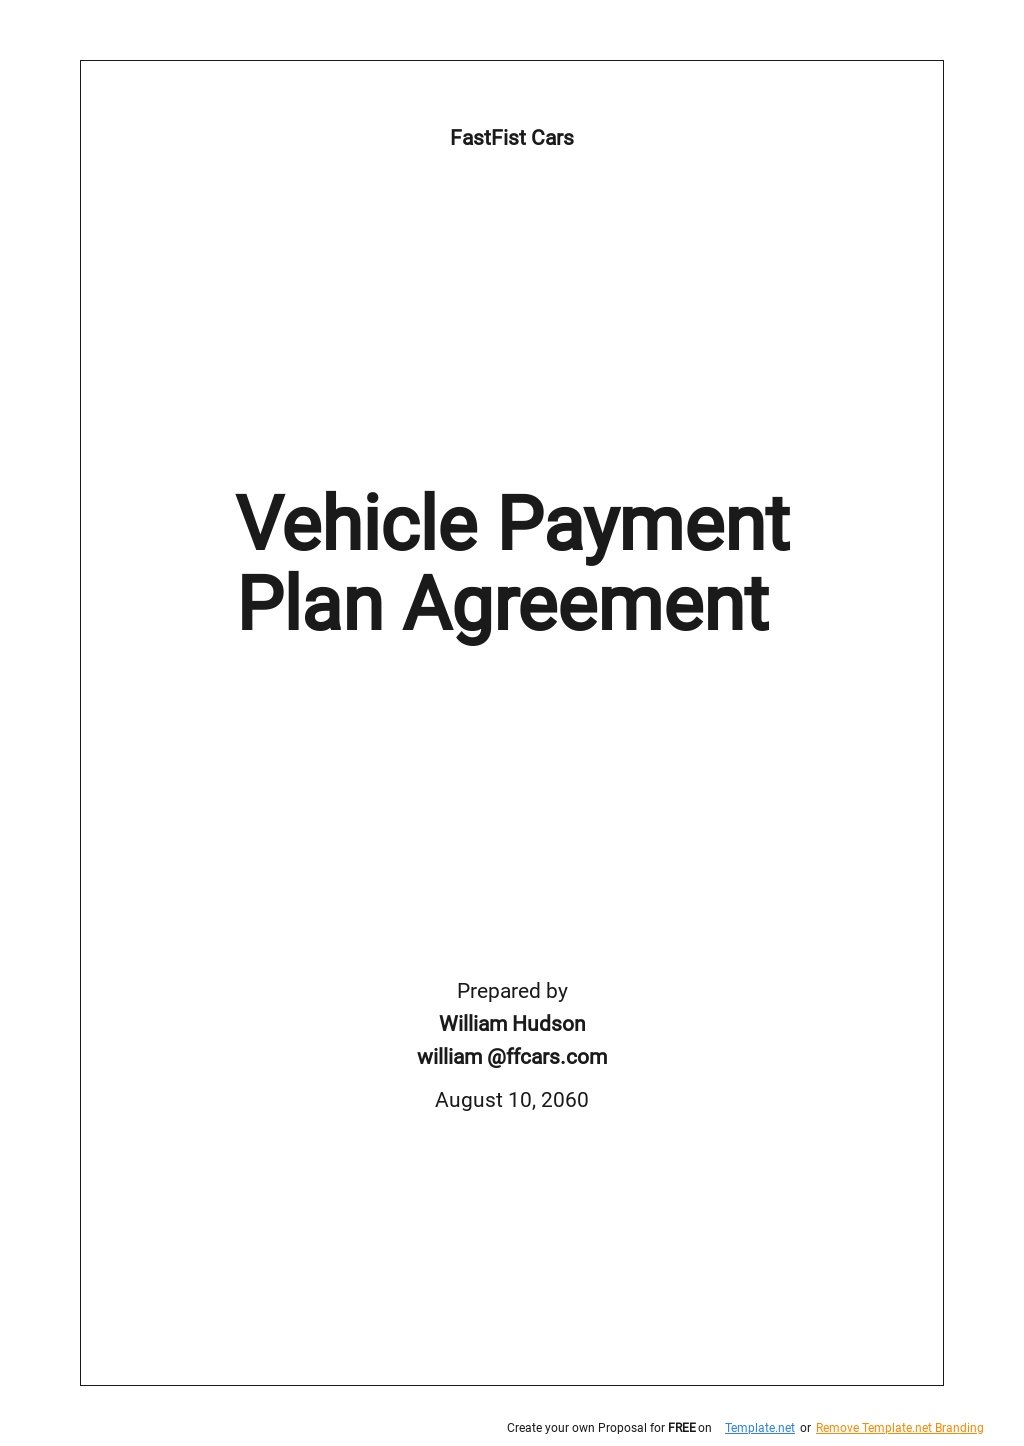 Vehicle Payment Agreement Template Google Docs, Word, Apple Pages